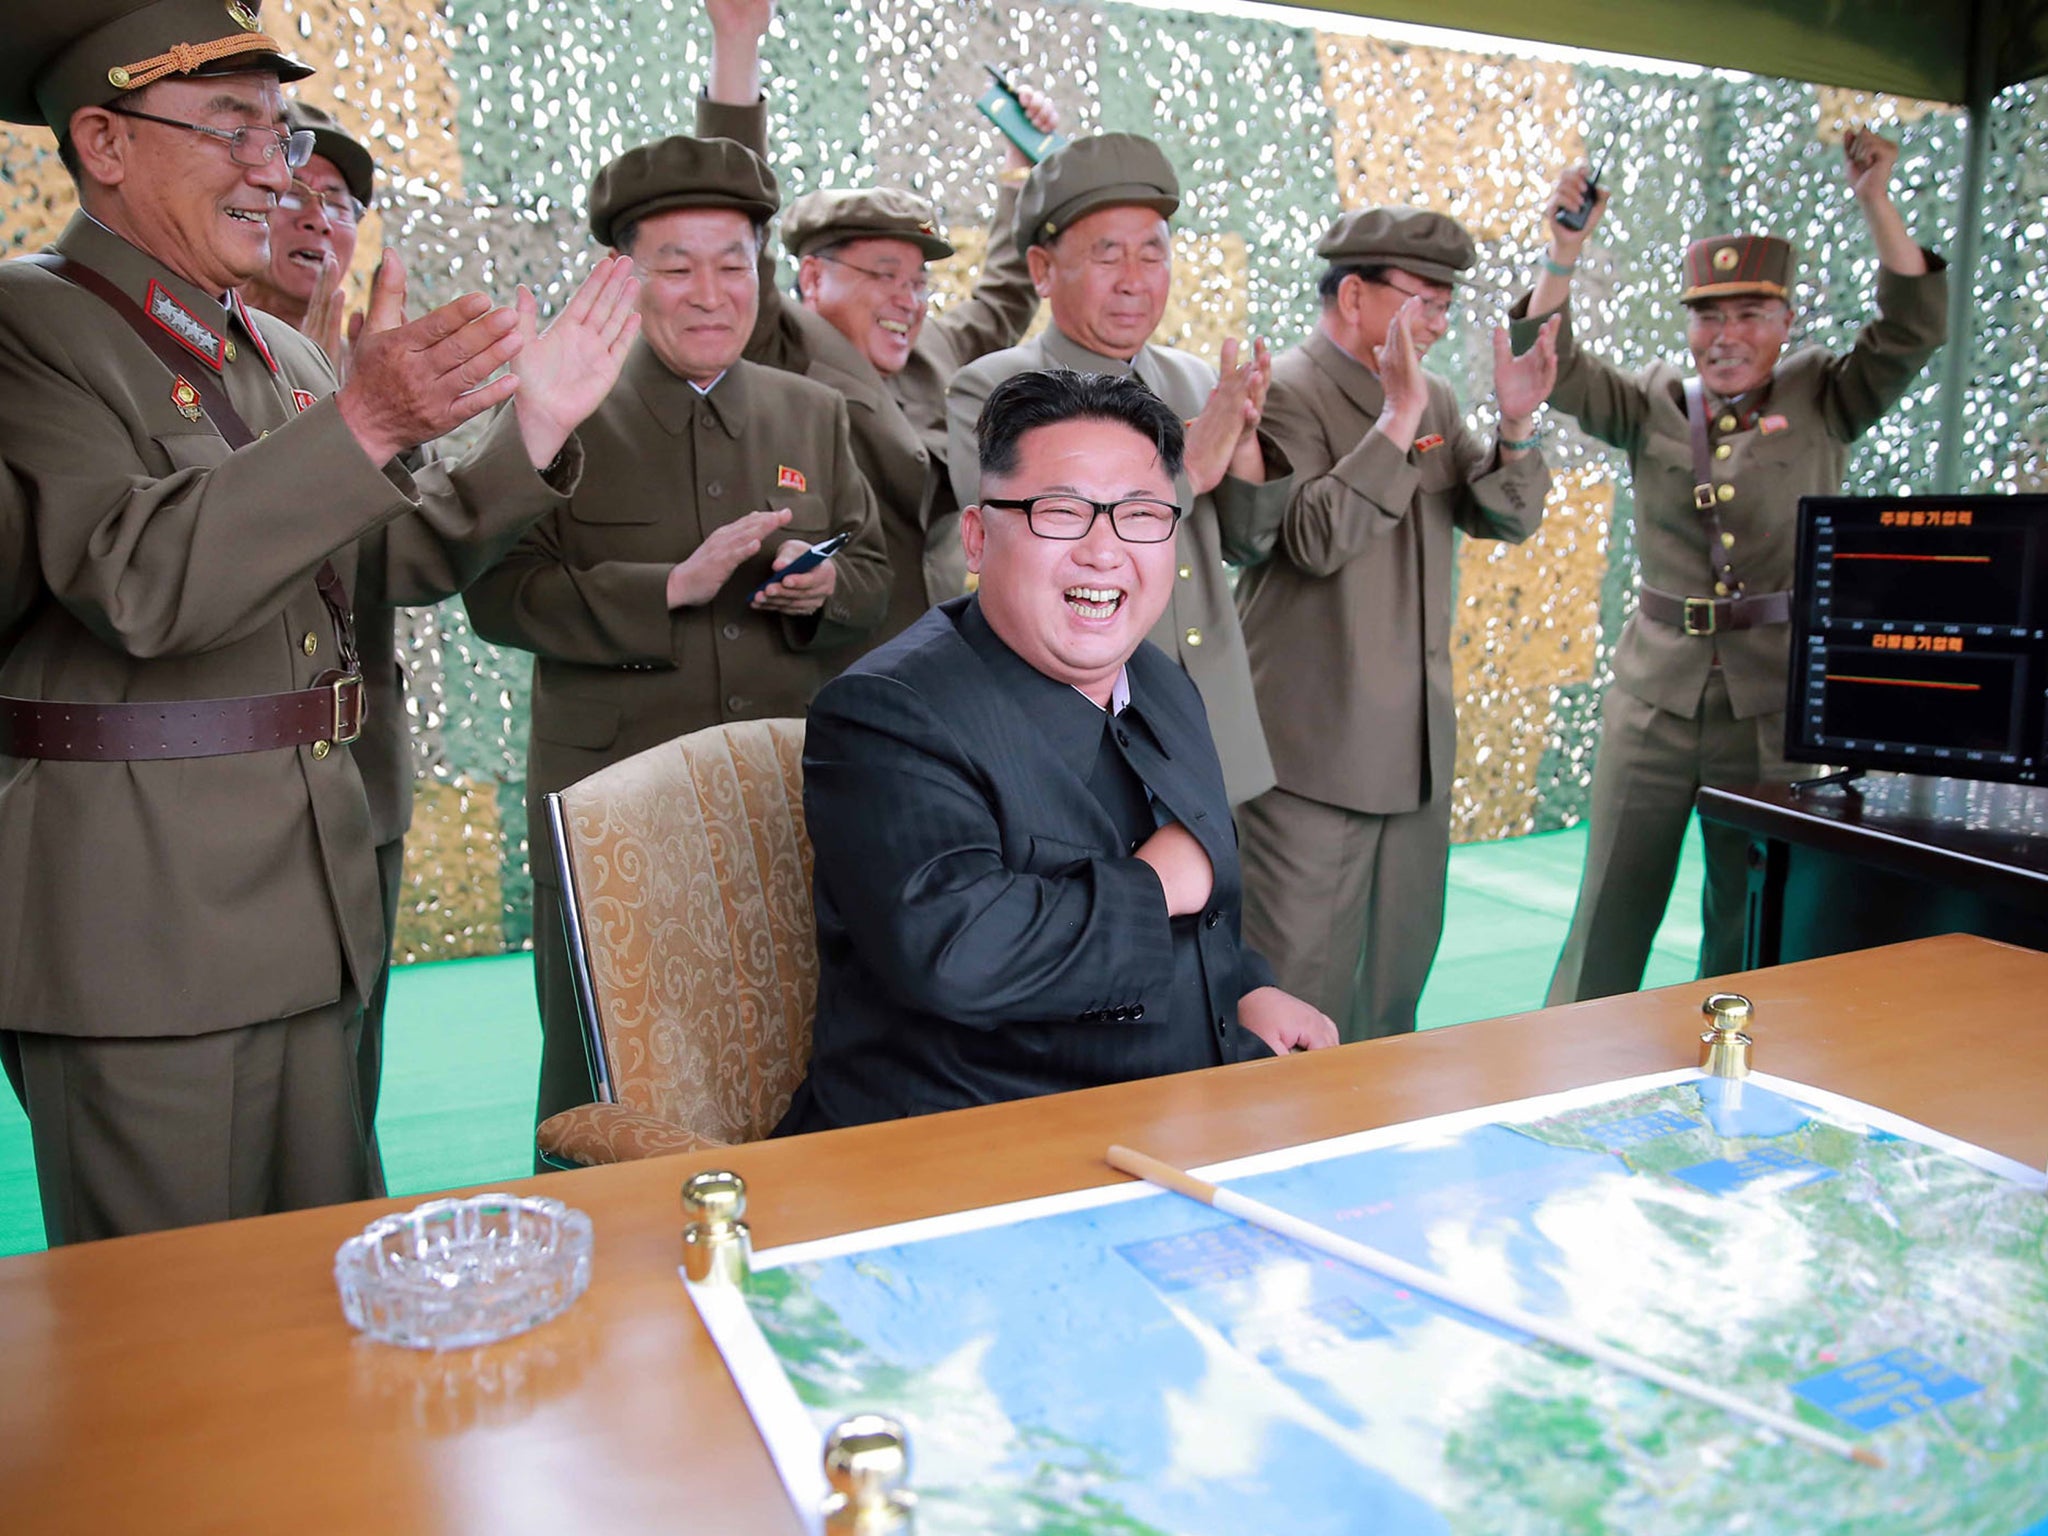 Reports suggest North Korea - led by Kim Jong-un - might be on the verge of another nuclear test